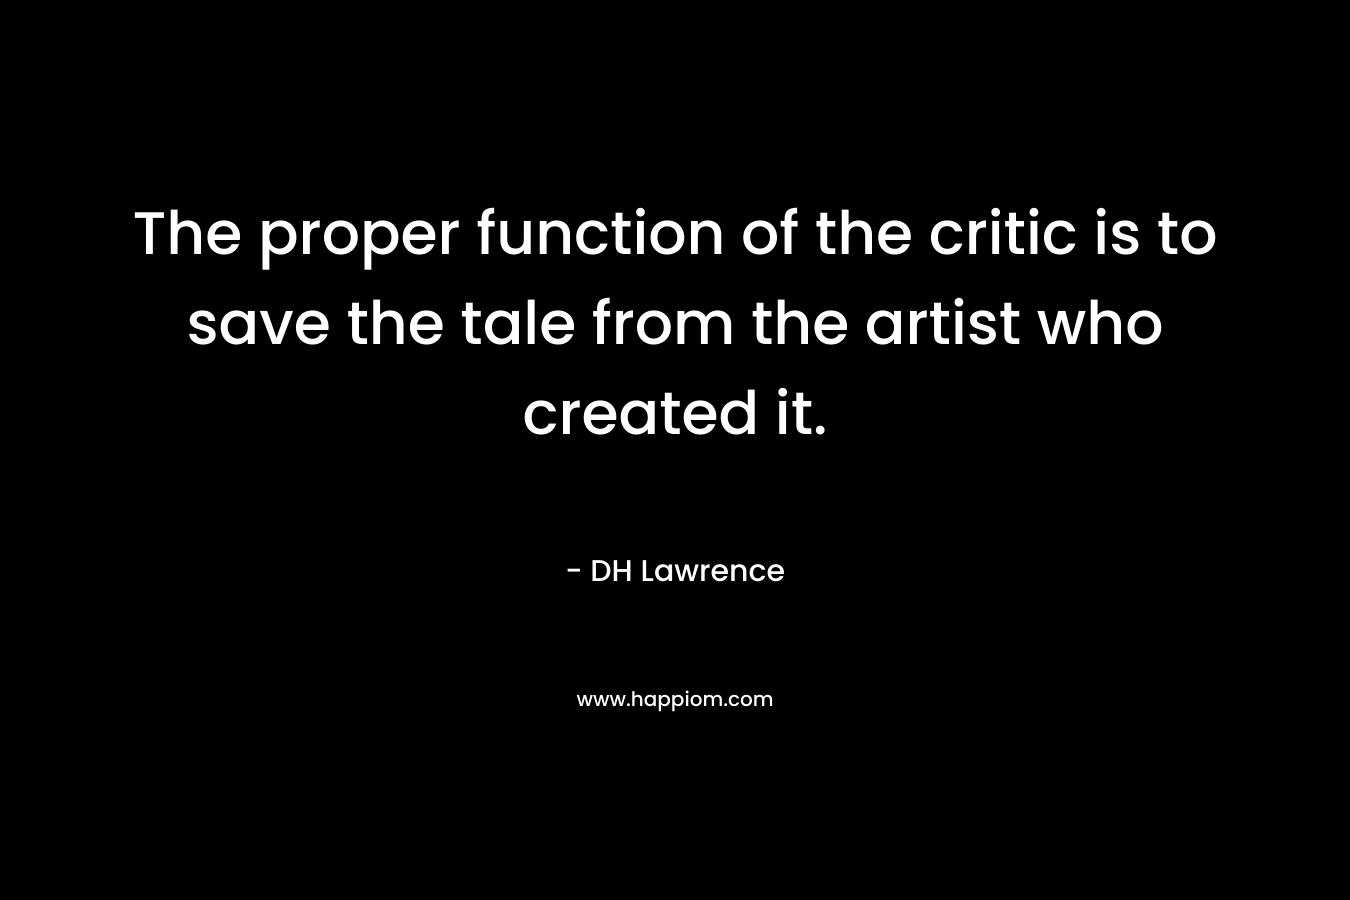 The proper function of the critic is to save the tale from the artist who created it. – DH Lawrence